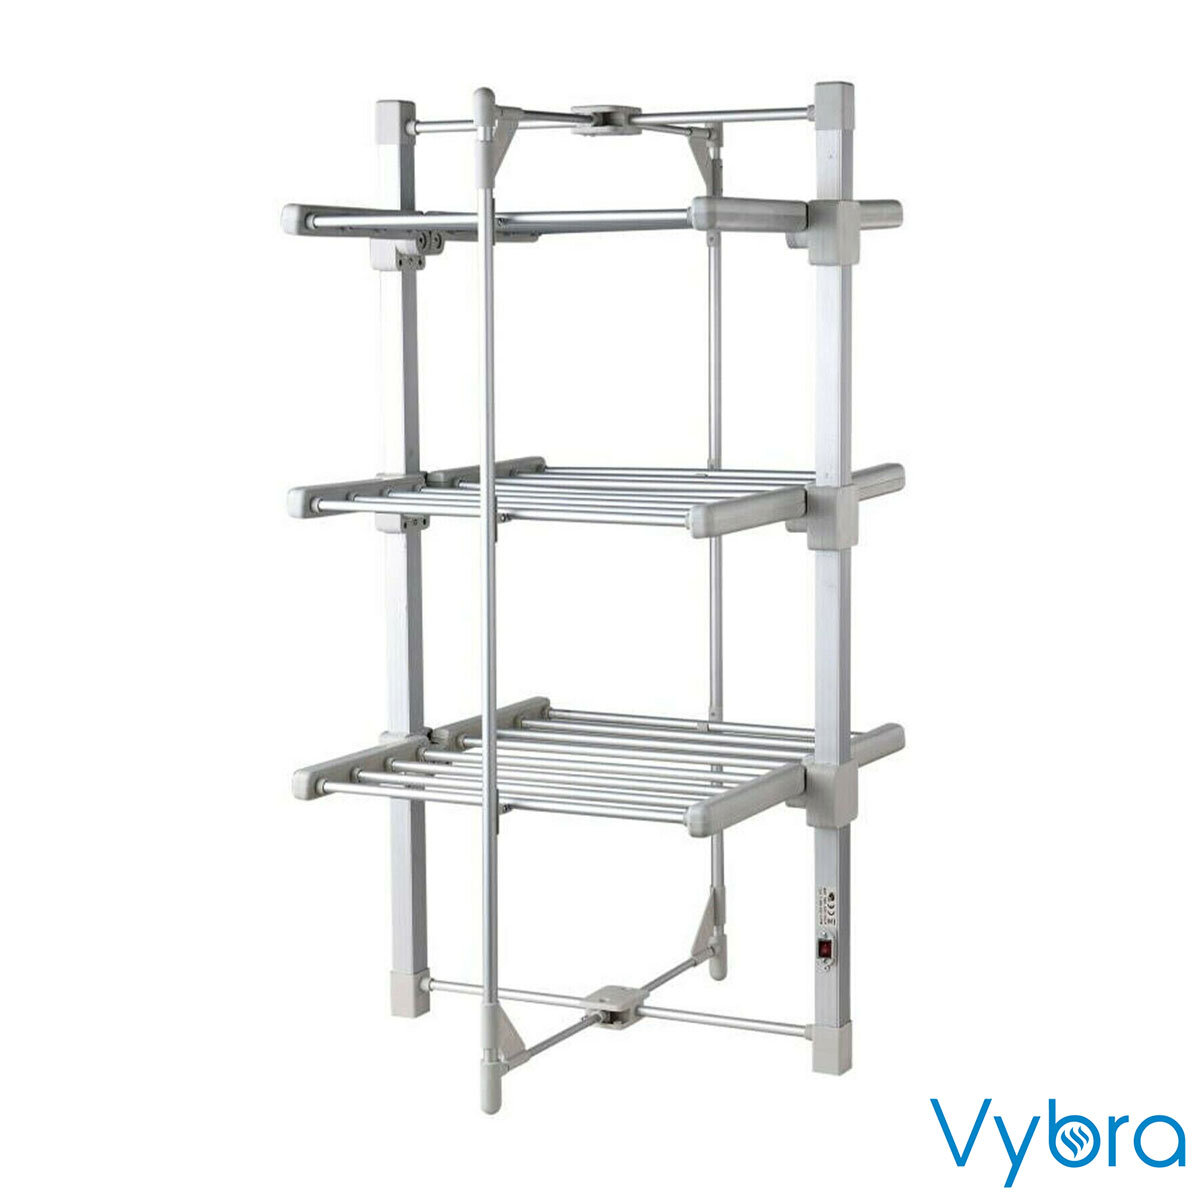 Clothes Airer Heated Dryer & Cover Economic Washing Laundry Tower Folding